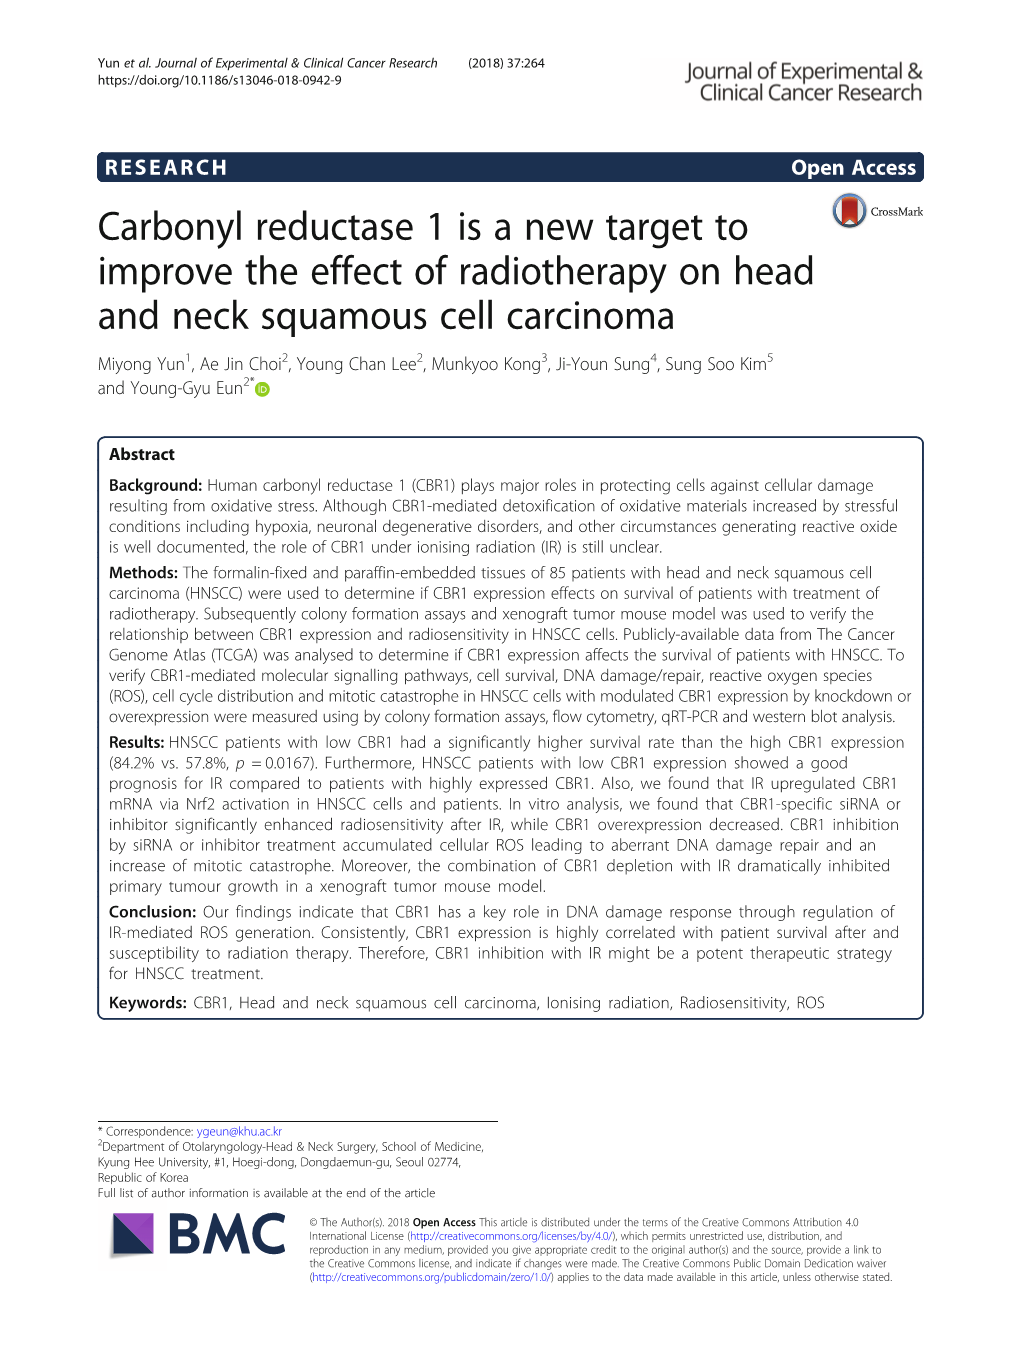 Carbonyl Reductase 1 Is a New Target to Improve the Effect of Radiotherapy on Head and Neck Squamous Cell Carcinoma